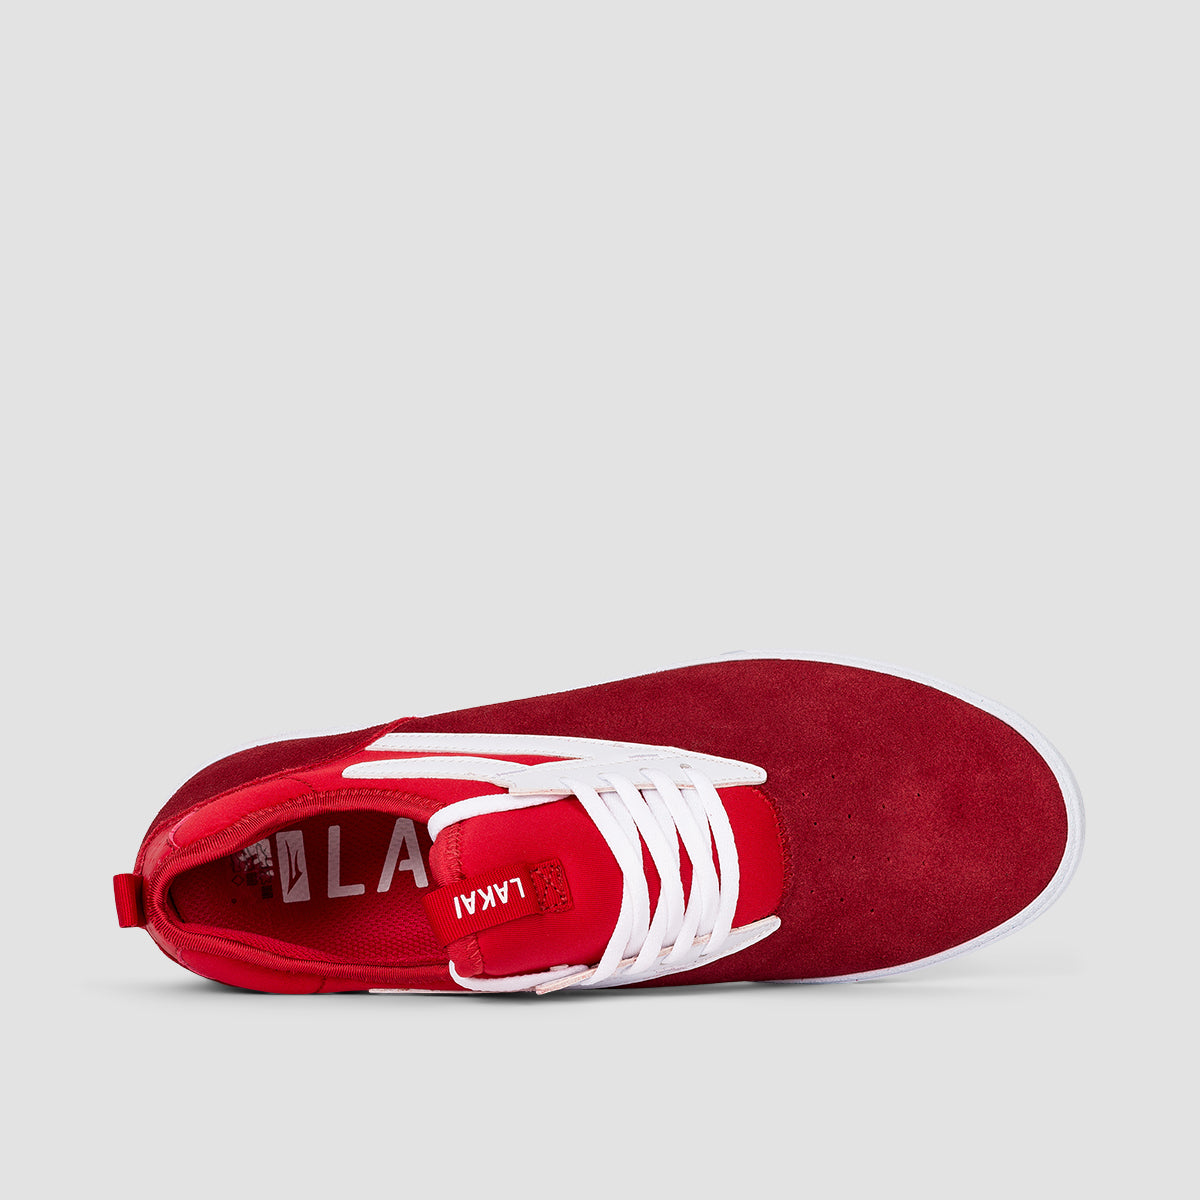 Lakai Dover Shoes - Red Suede